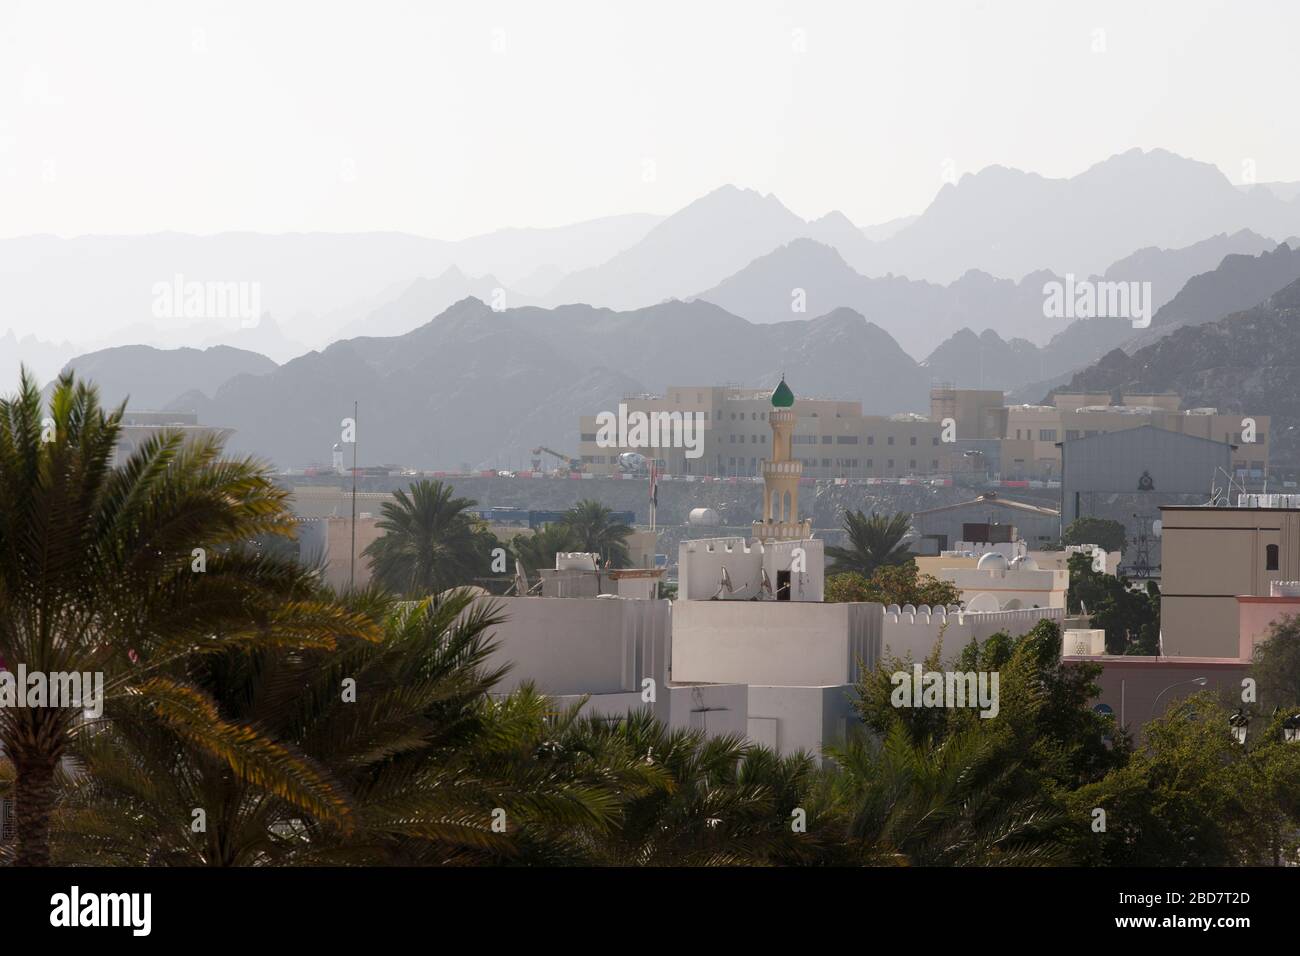 A view across a dry Omani landscape on the outskirts of Muscat. Stock Photo